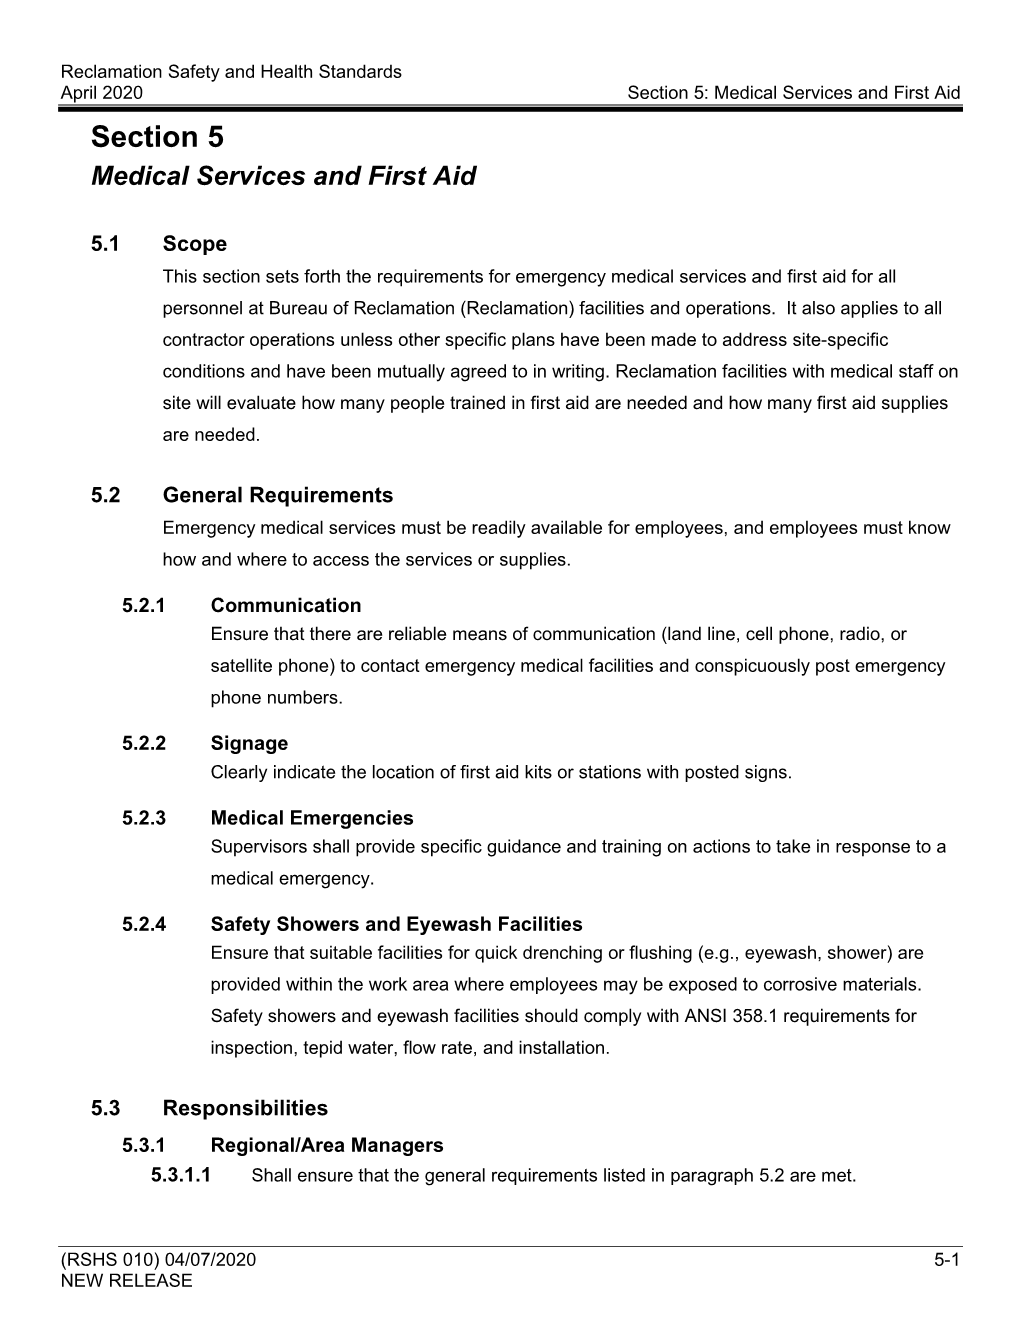 Section 5 Medical Services and First Aid